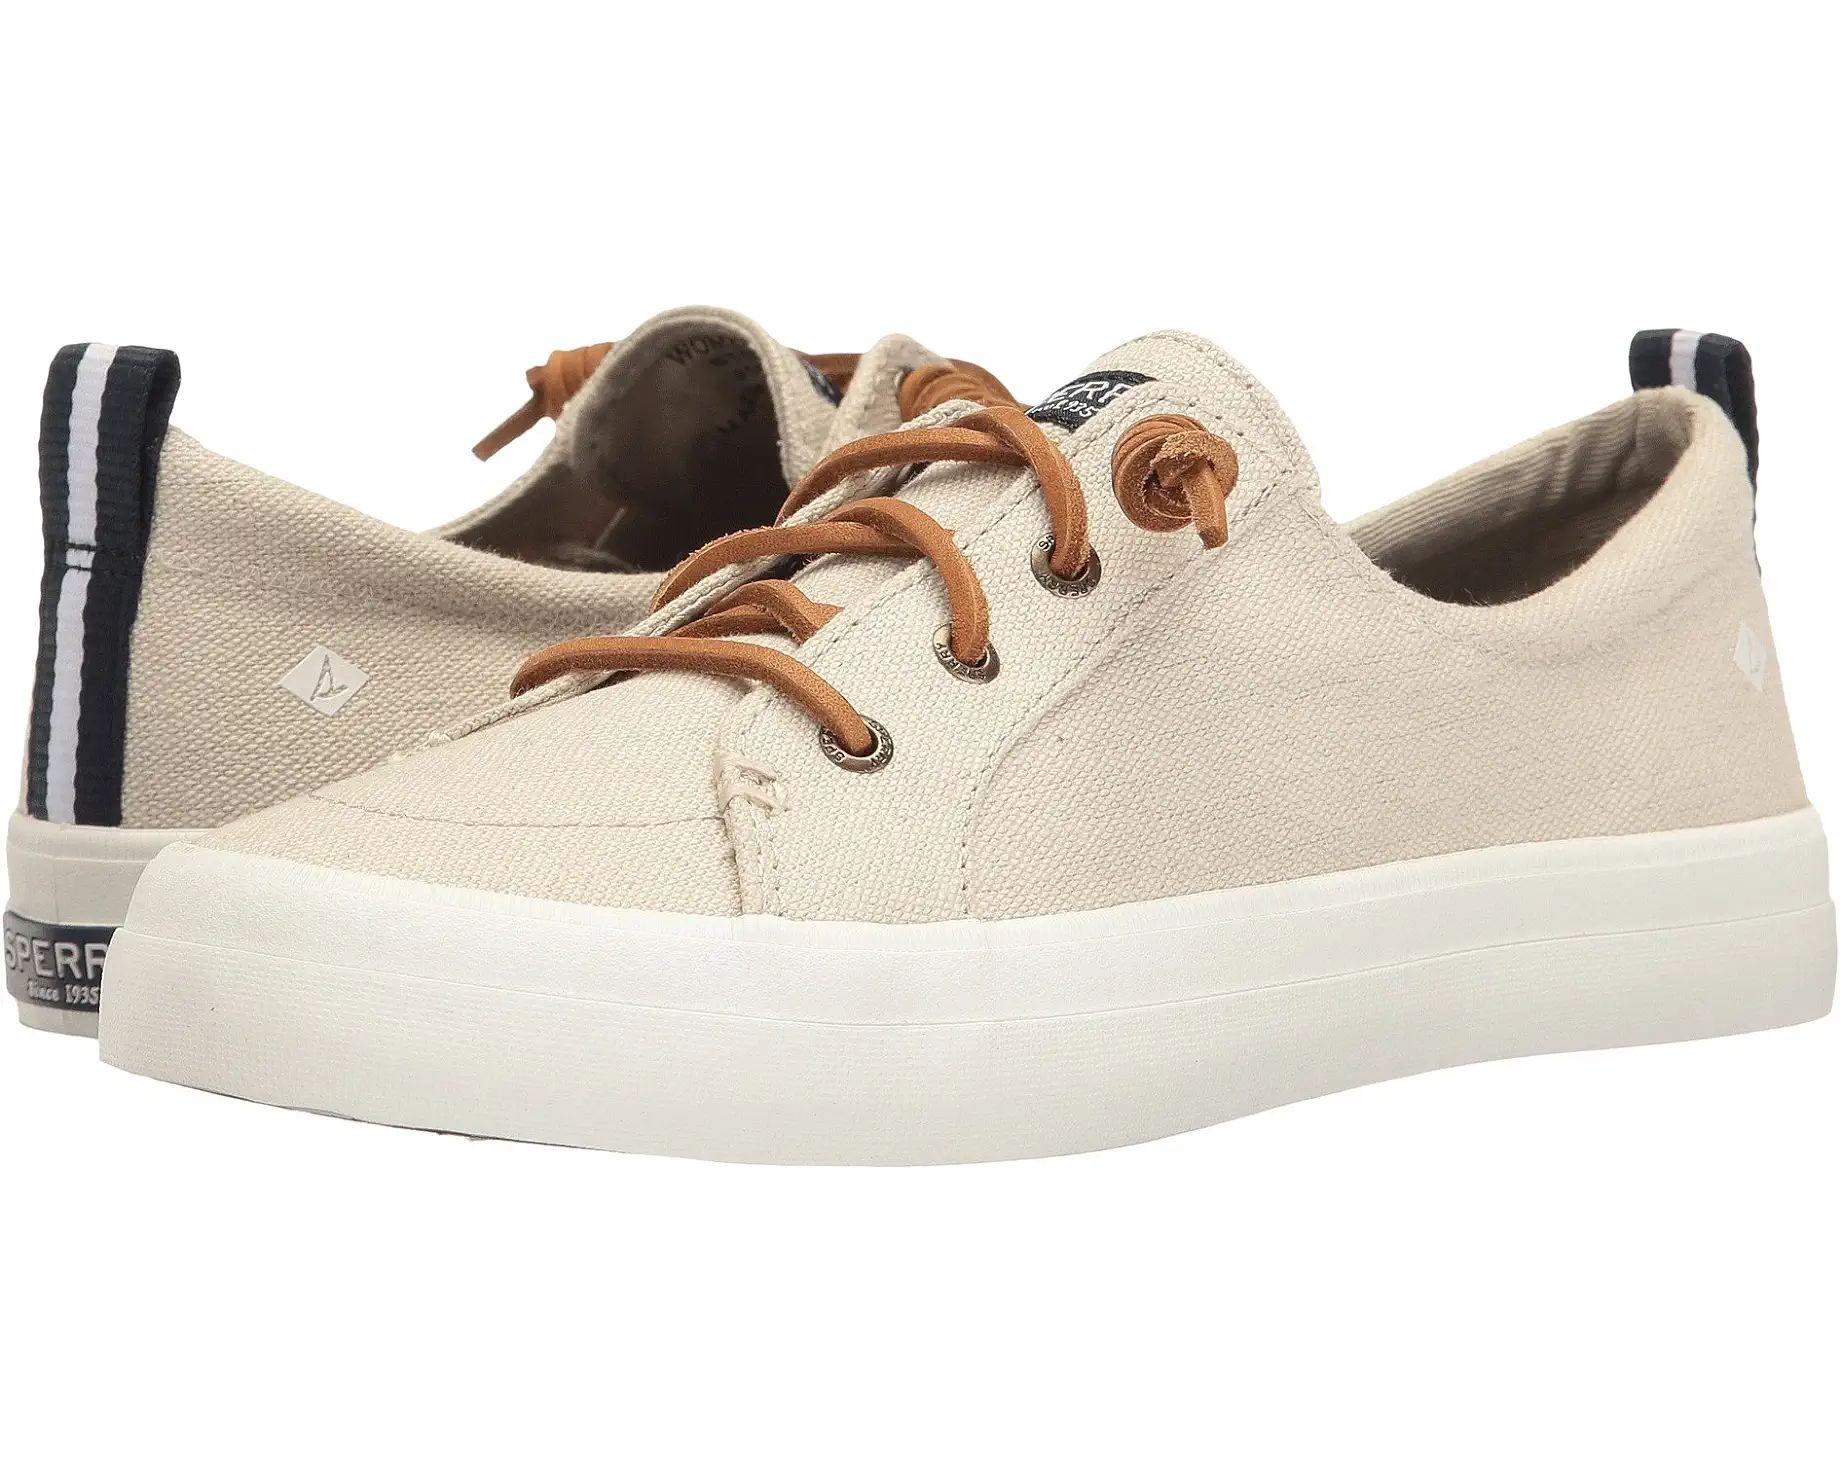 Crest Vibe Washed Linen | Zappos